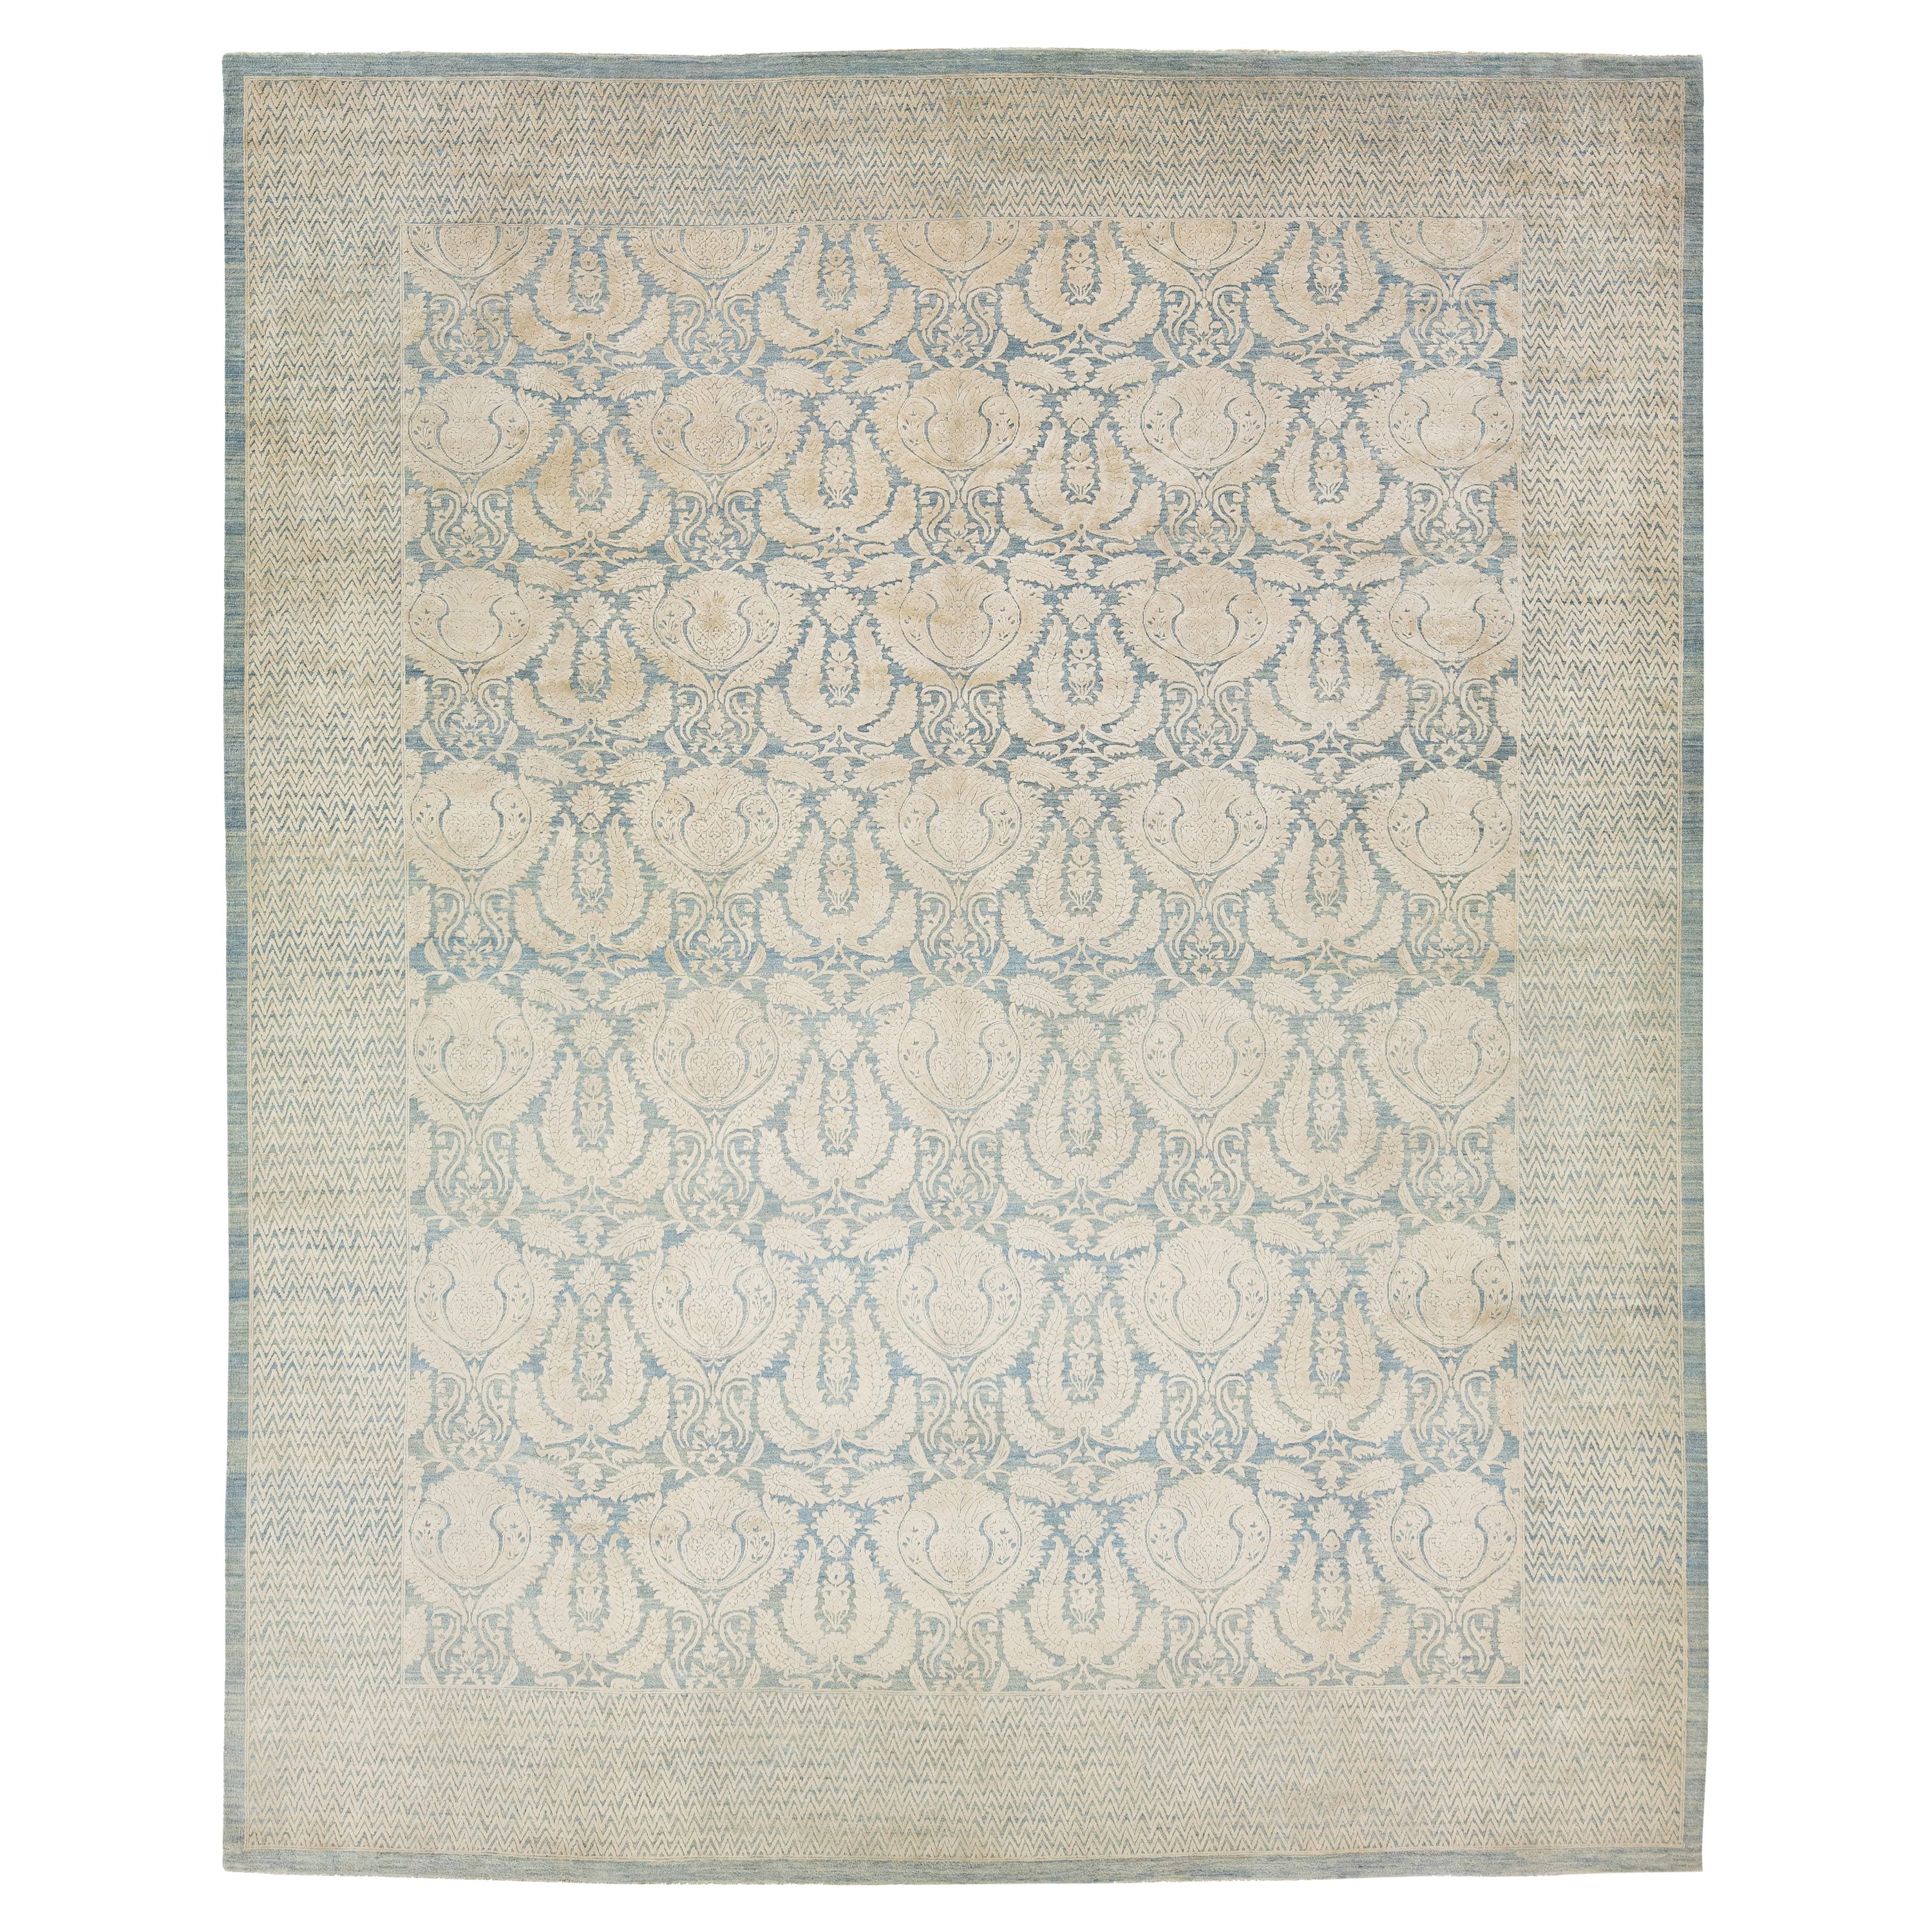 Transitional Handmade Wool Rug With Allover Pattern In Beige and Blue Colors 